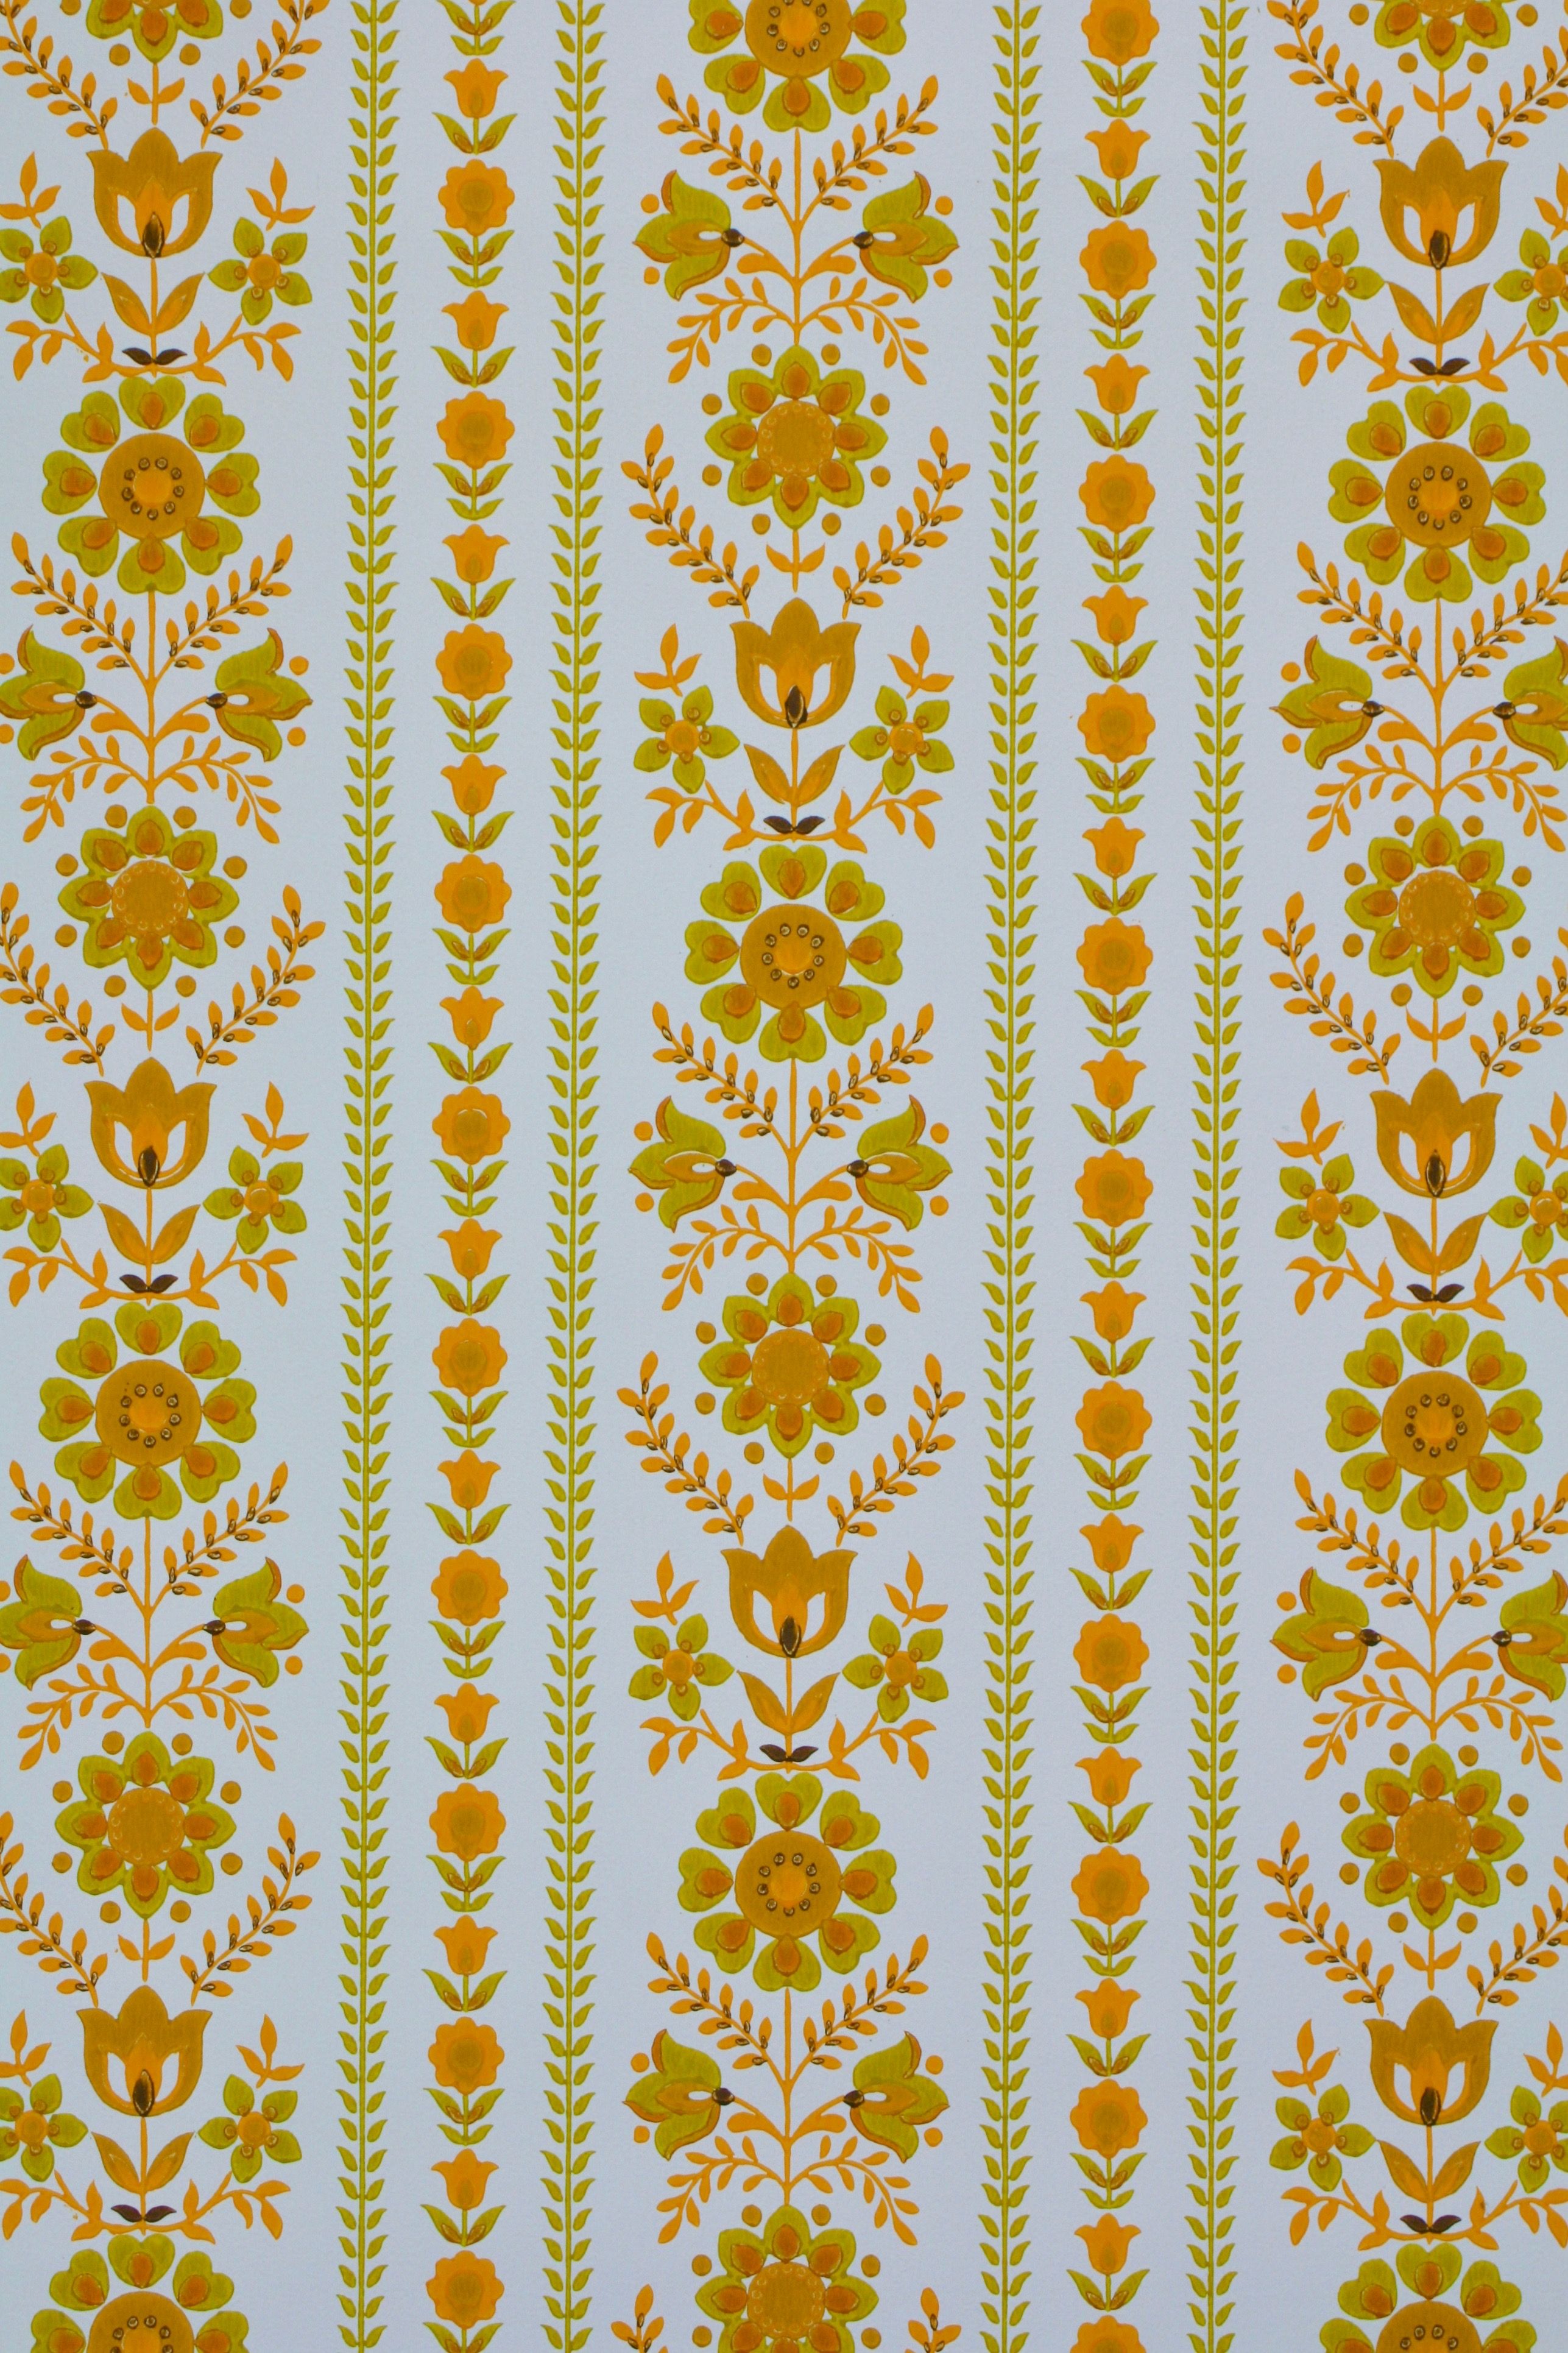 60s 1960s Retro Wallpaper Background  60s Texture Backgrounds  60s Vintage  Backgorund created with Generative AI technology Stock Illustration  Adobe  Stock